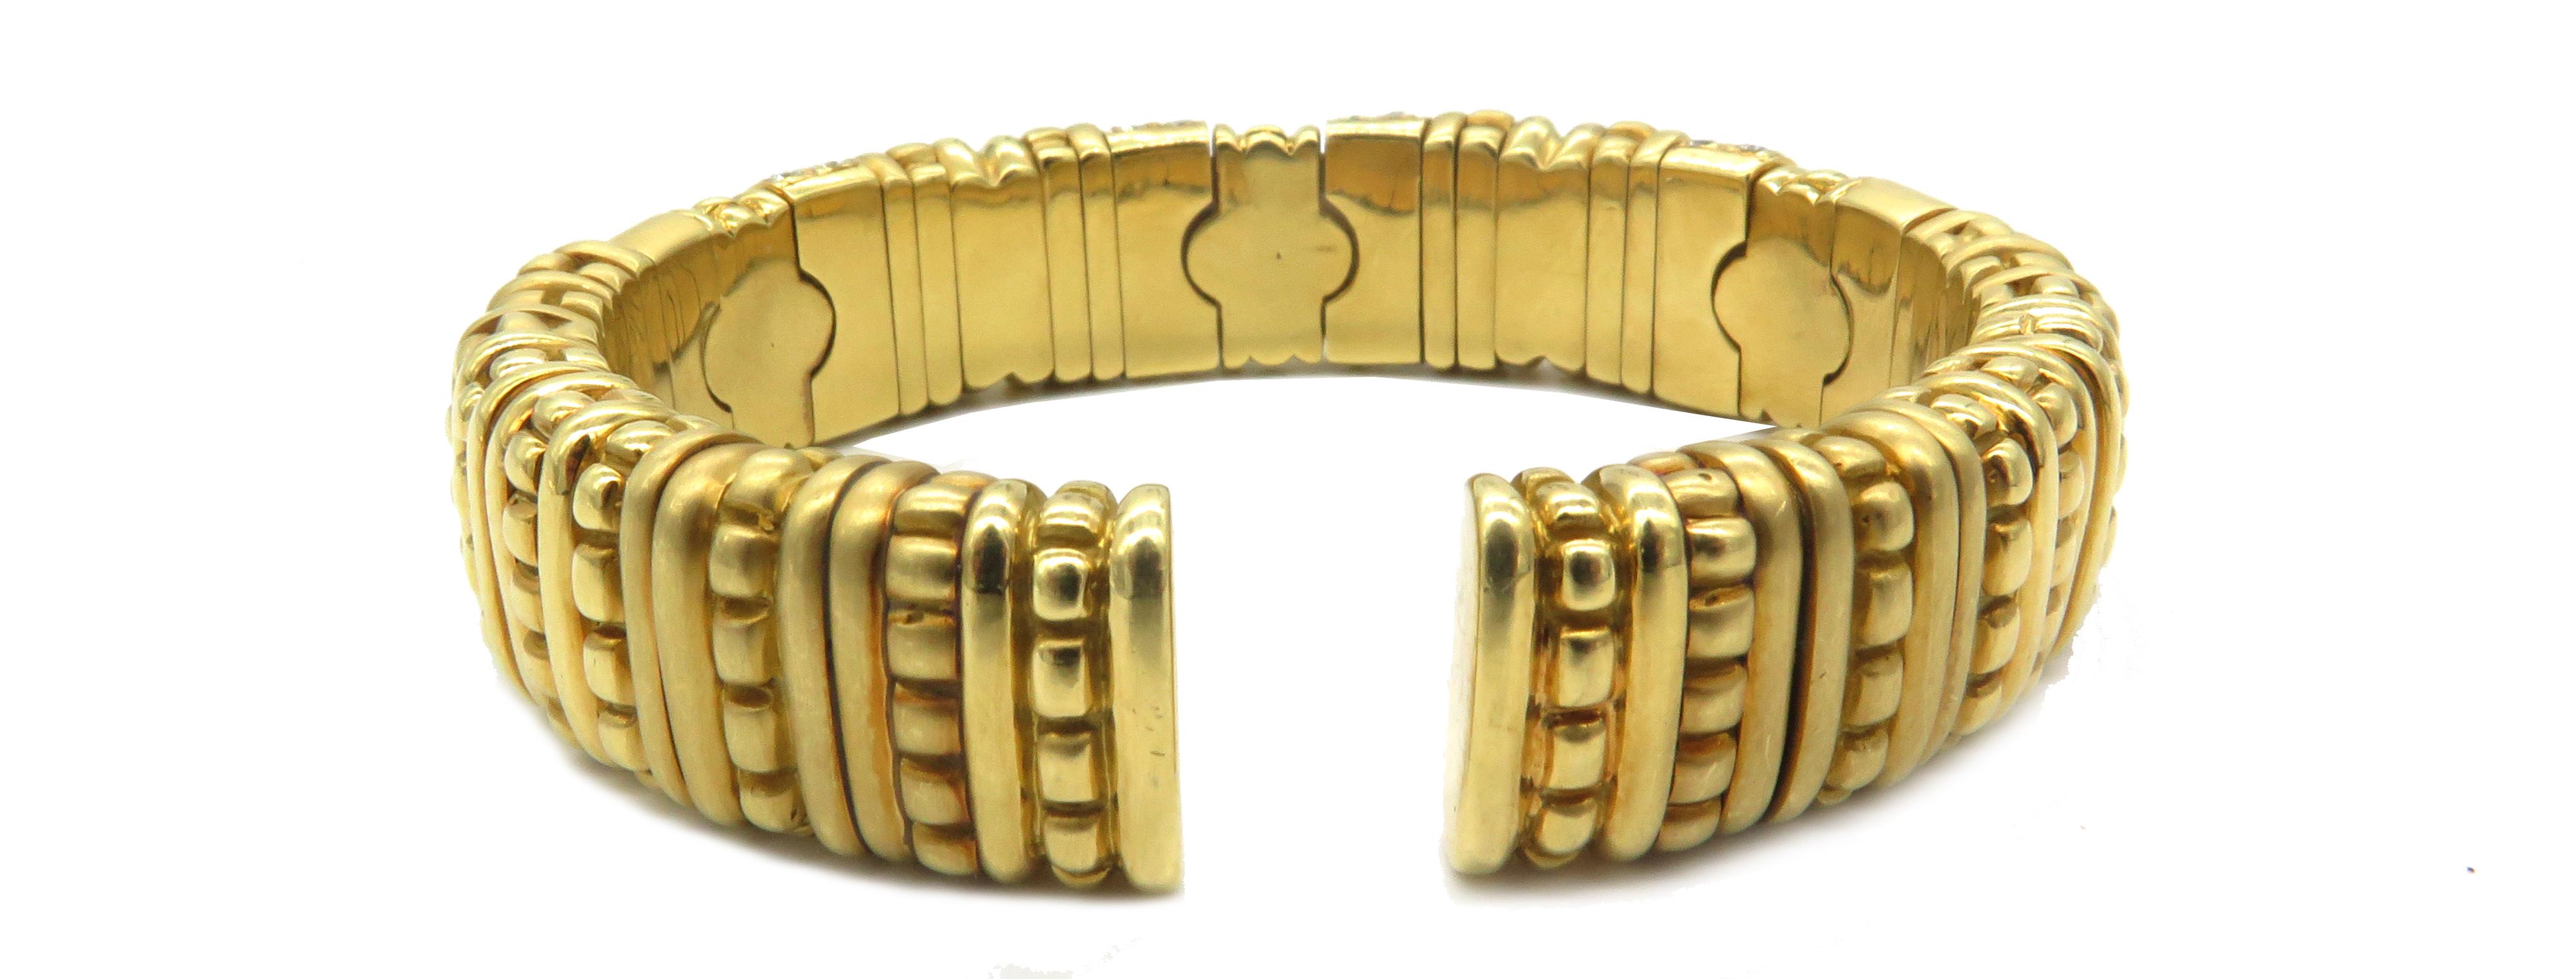 18K Yellow Gold
Dia 2.50cts
An 18 Yellow Gold bangle with an array of diamonds. This beautiful bangle also has a 3 rubelite following the pattern of the decorative design in the bangle. There, an approximate 2.50cts in diamonds. The bangle weighs